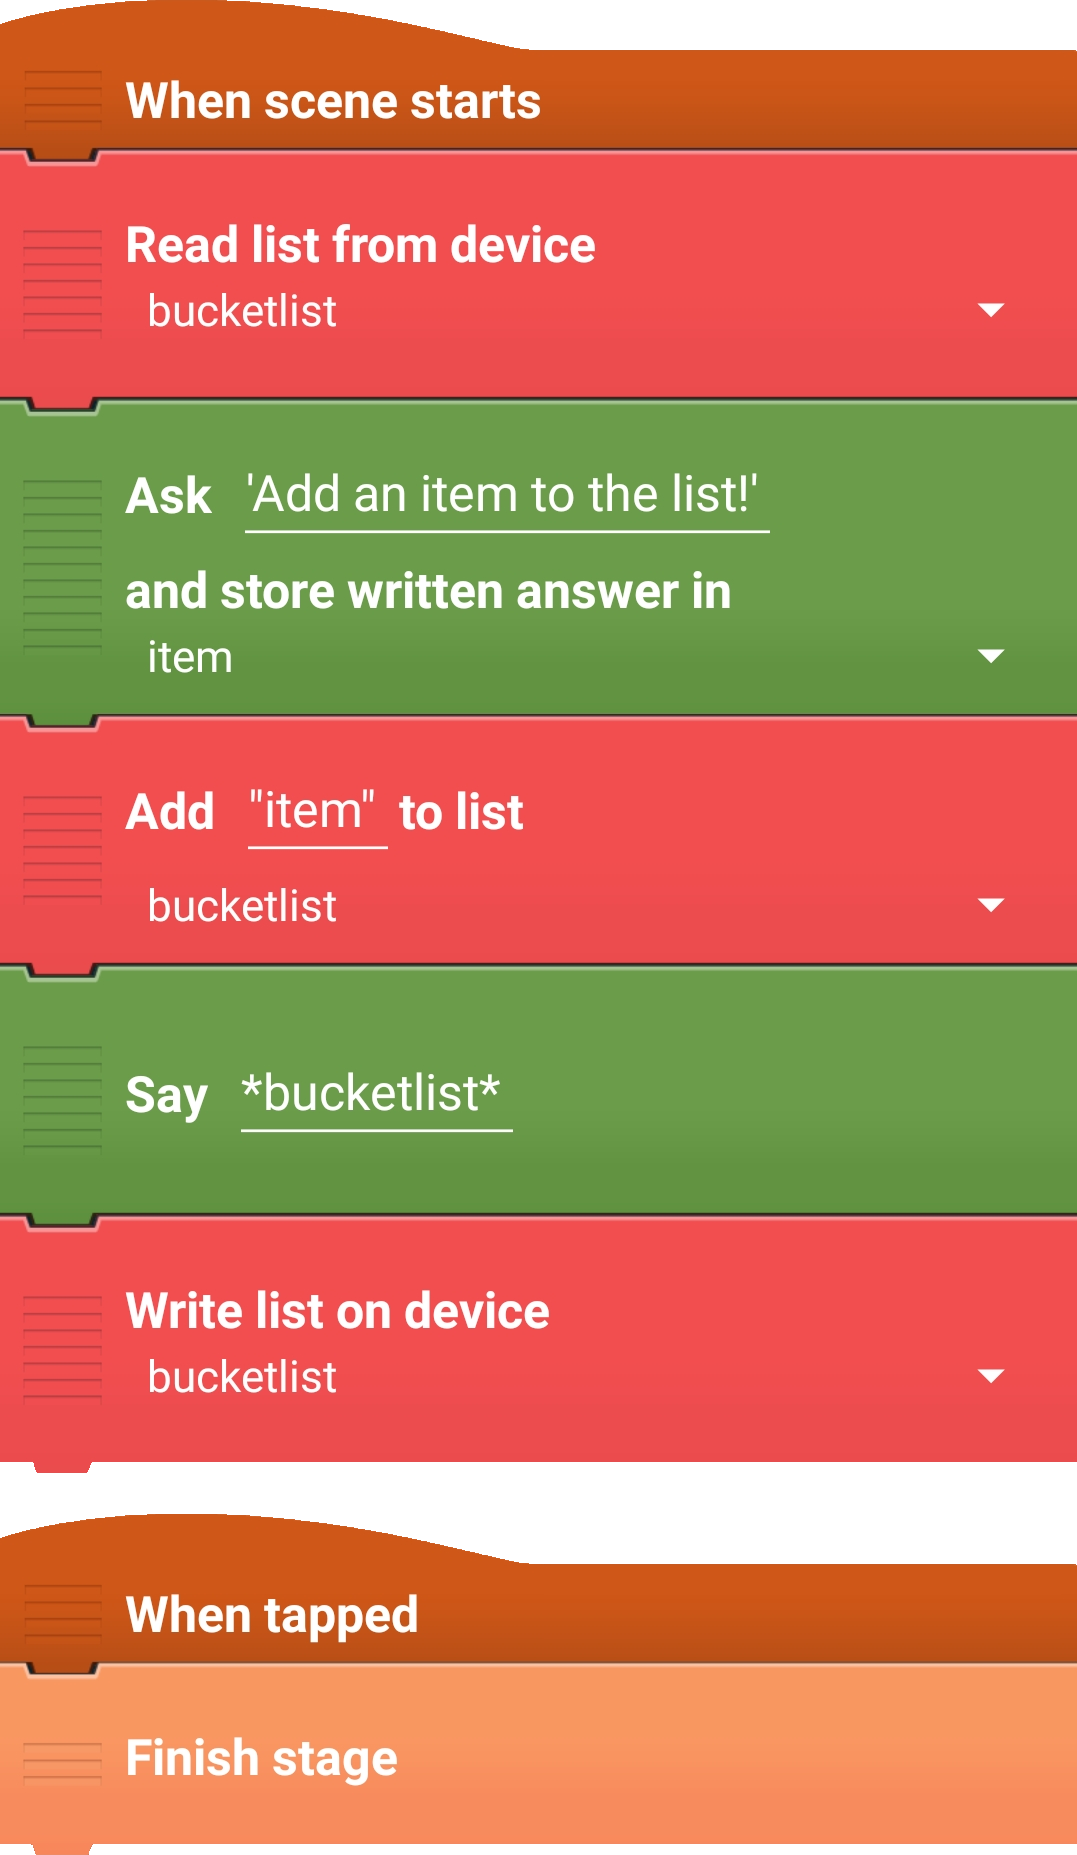 read-list-from-device-example.png